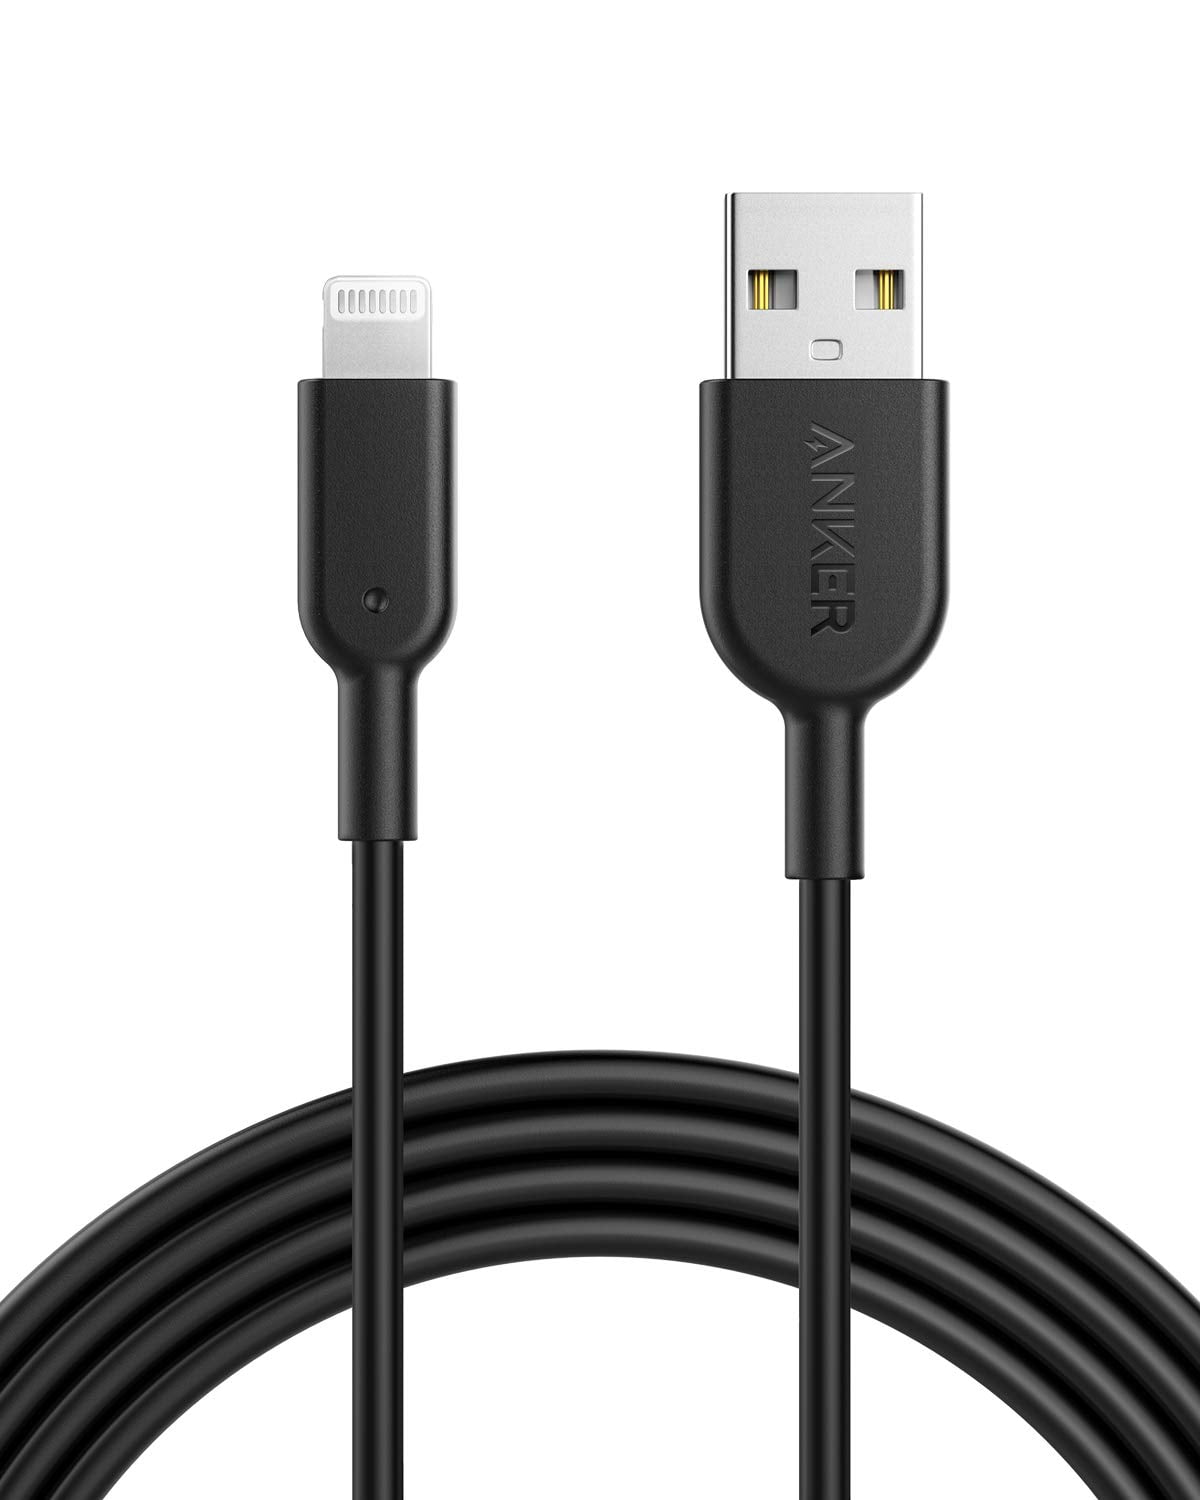 rester så meget gennemse Anker iPhone Charger Cable, Powerline II Lightning Cable (10 Feet), Durable  Cable, MFi Certified for iPhone Xs/XS Max/XR/X/8/8 Plus/7/7 Plus, iPad 8  (Black) - Walmart.com